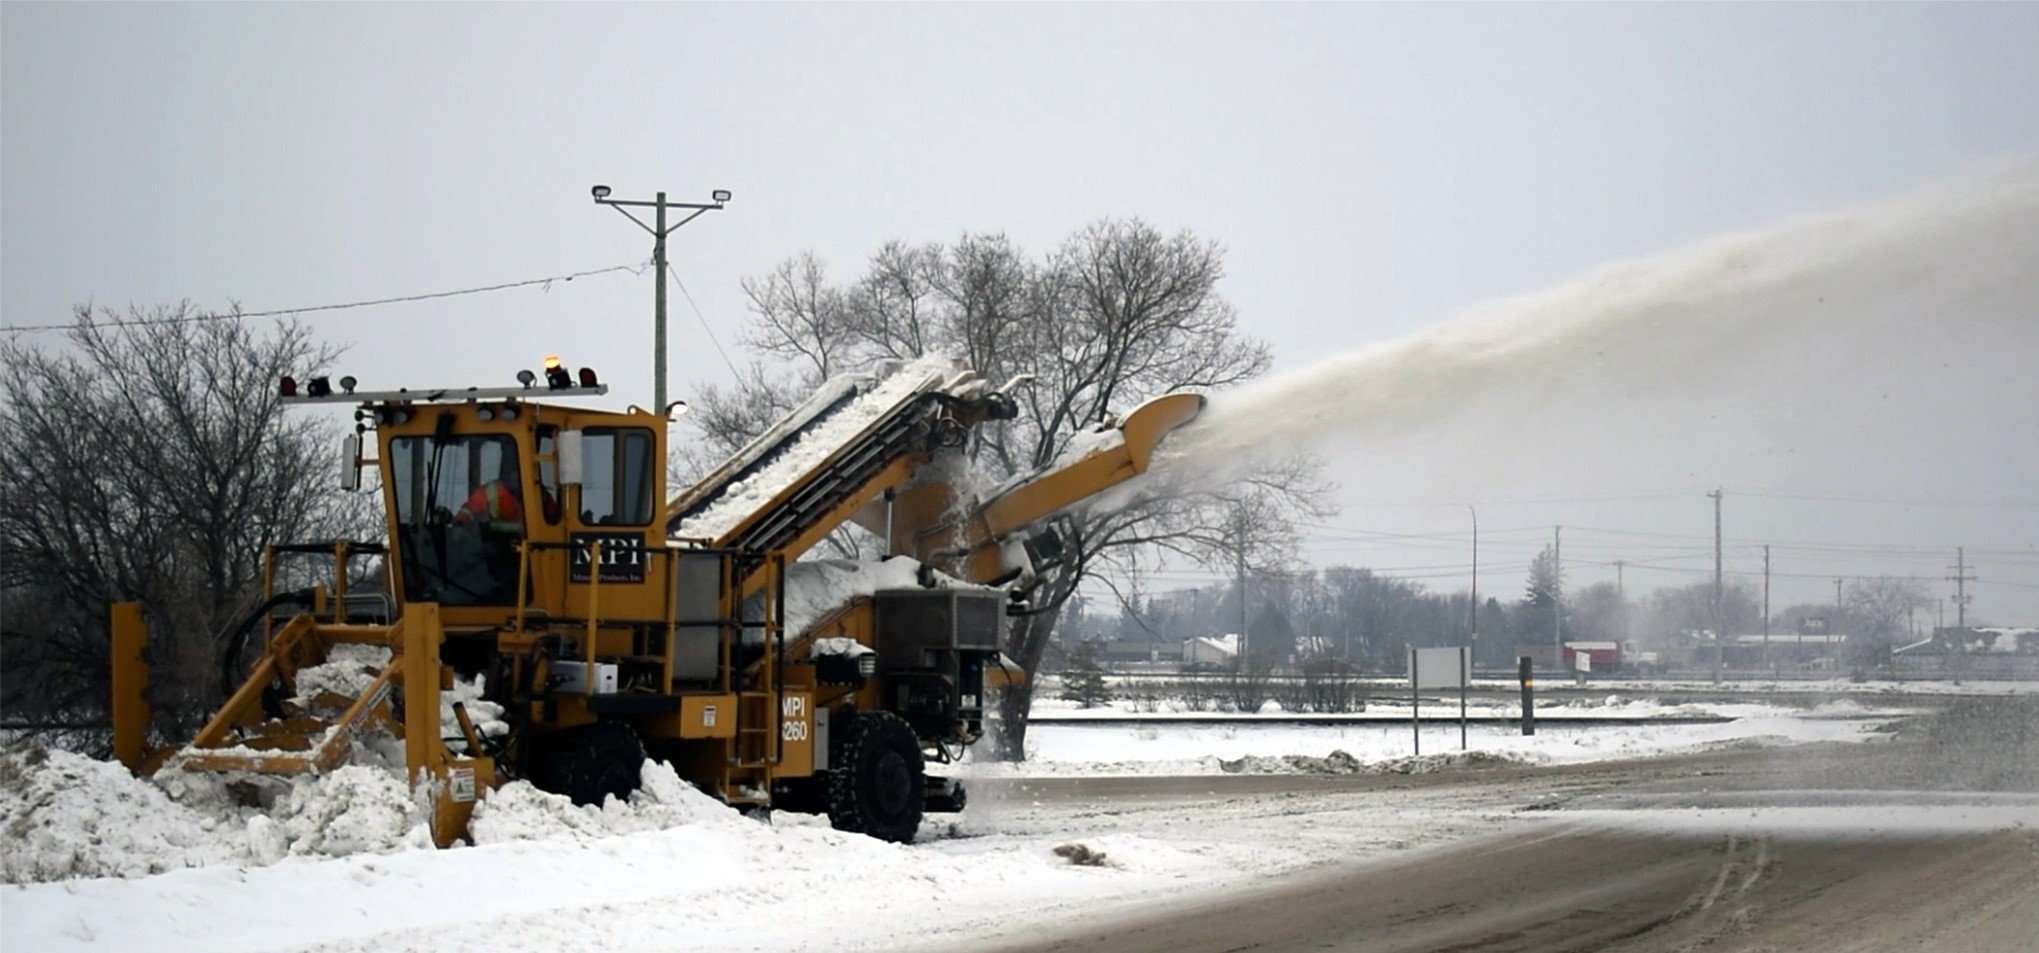 6260 Loading and blowing snow